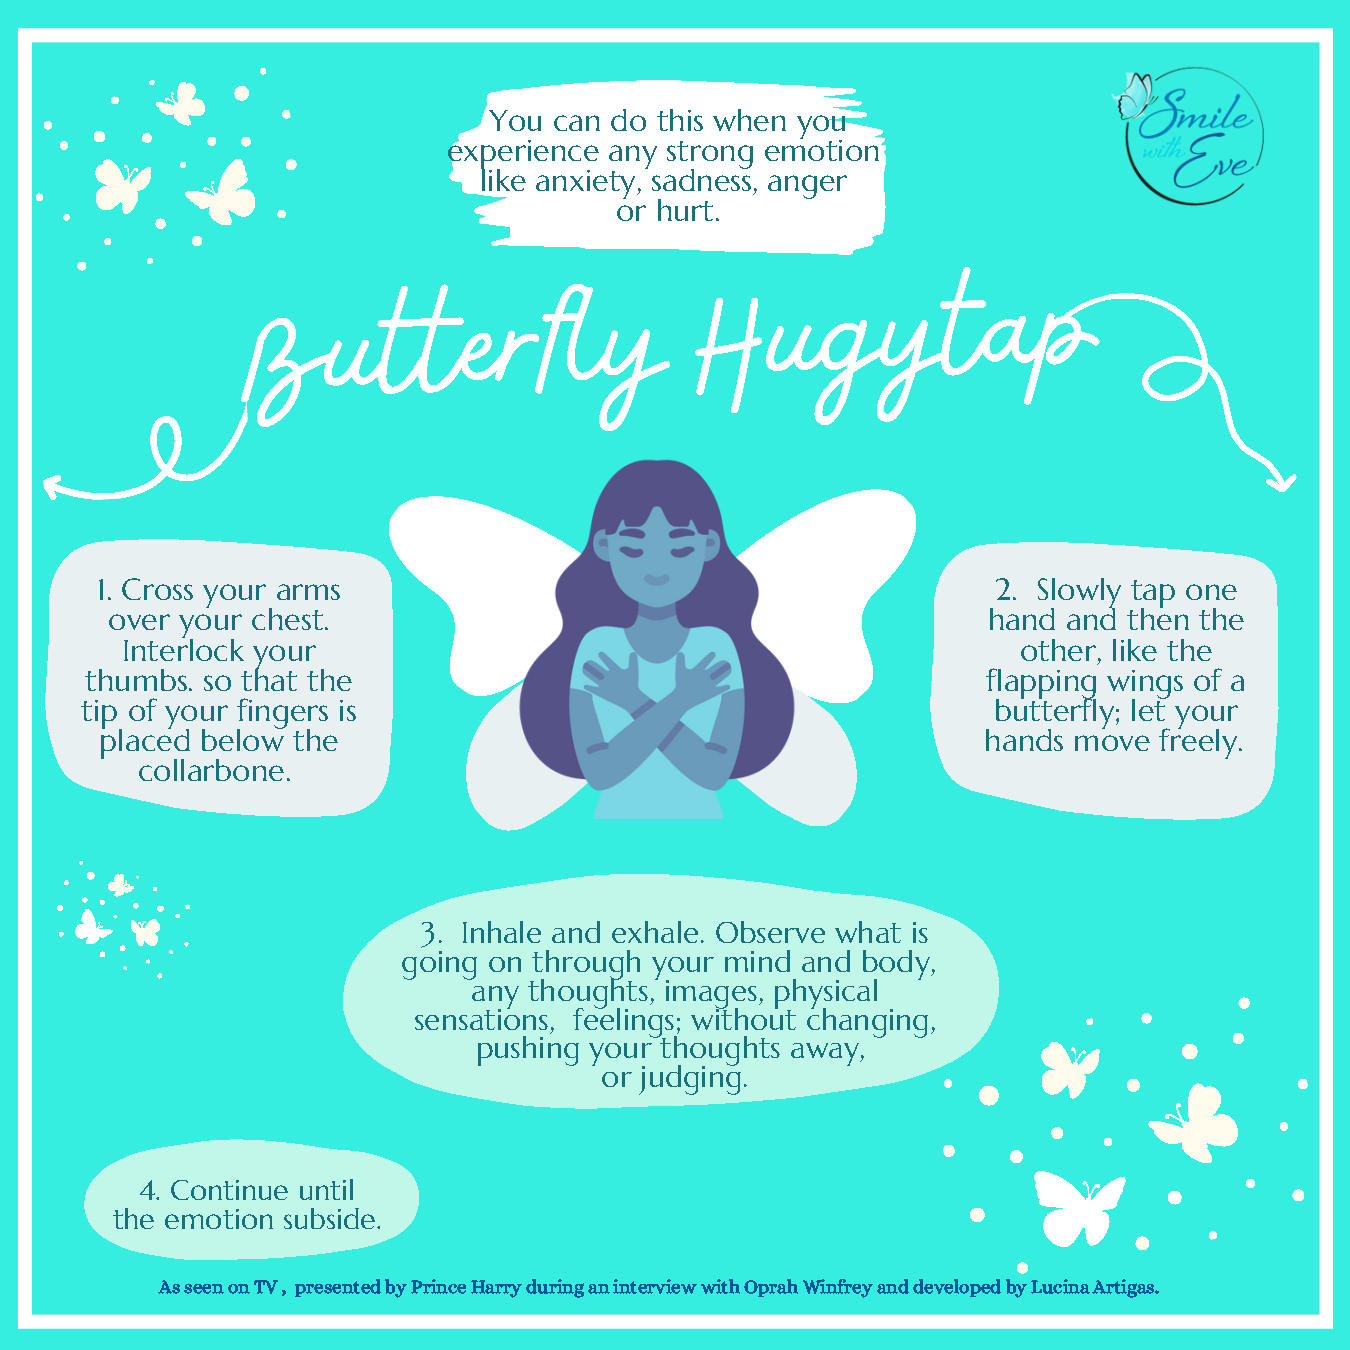 Butterfly hugytap relaxation technique.pdf